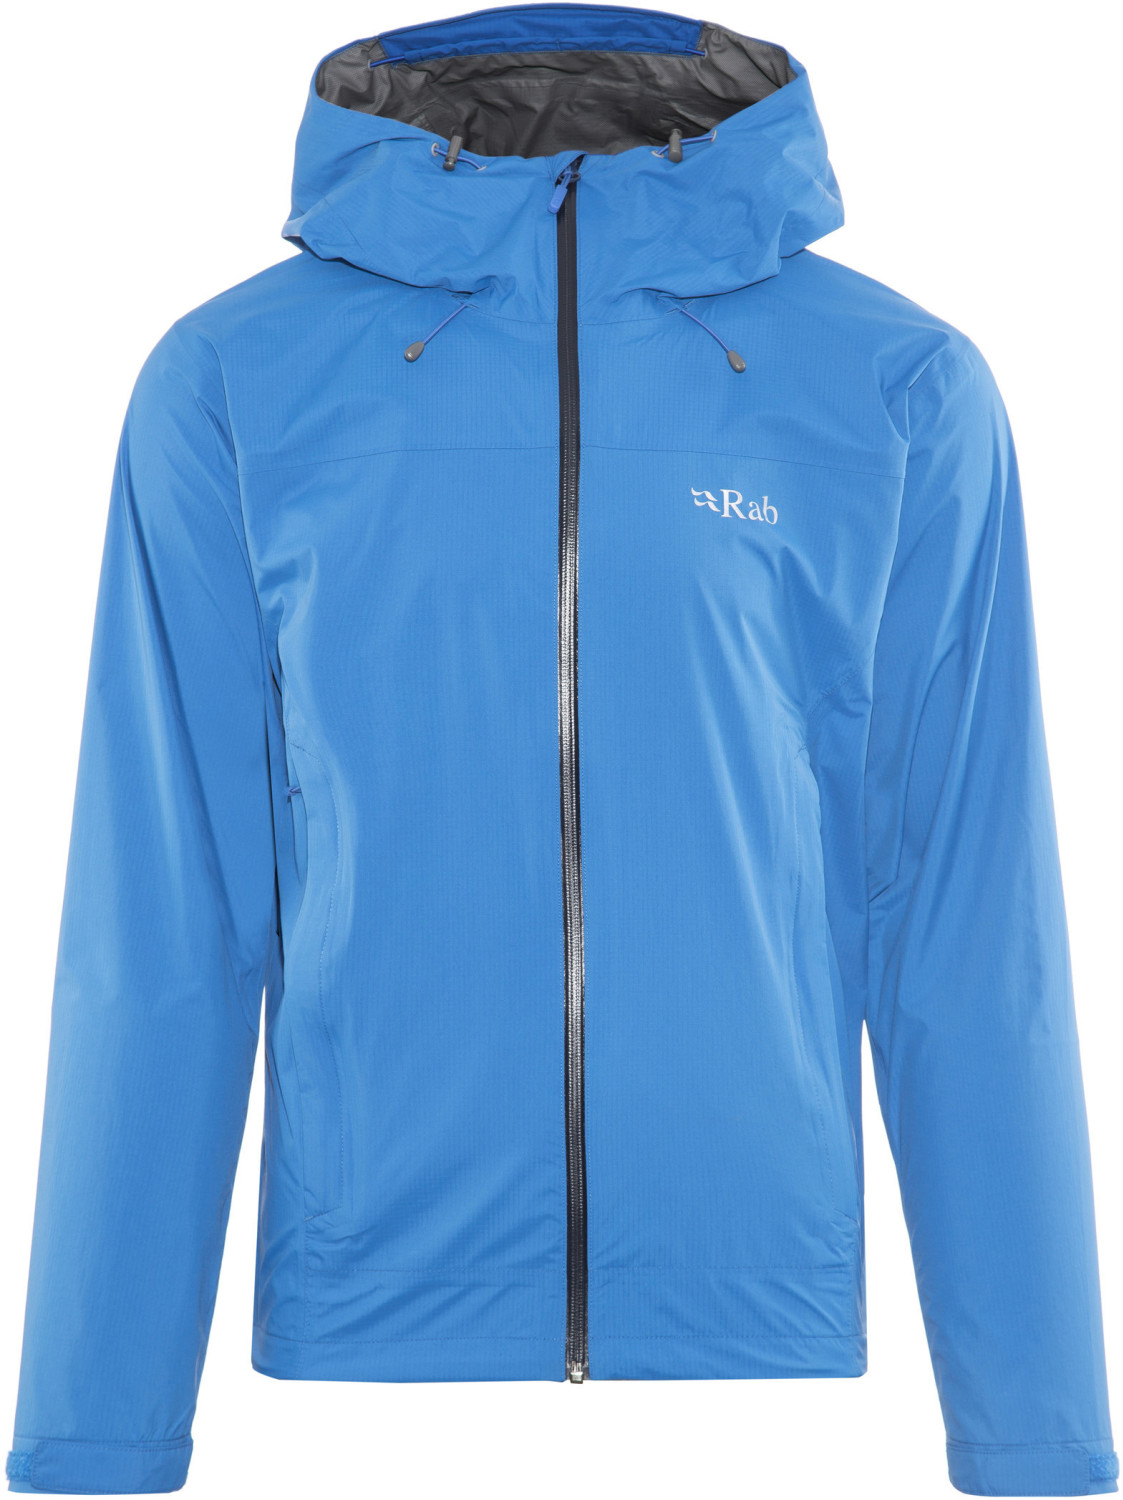 Buy Rab Downpour Jacket Men Blue from £93.82 (Today) – Best Deals on ...